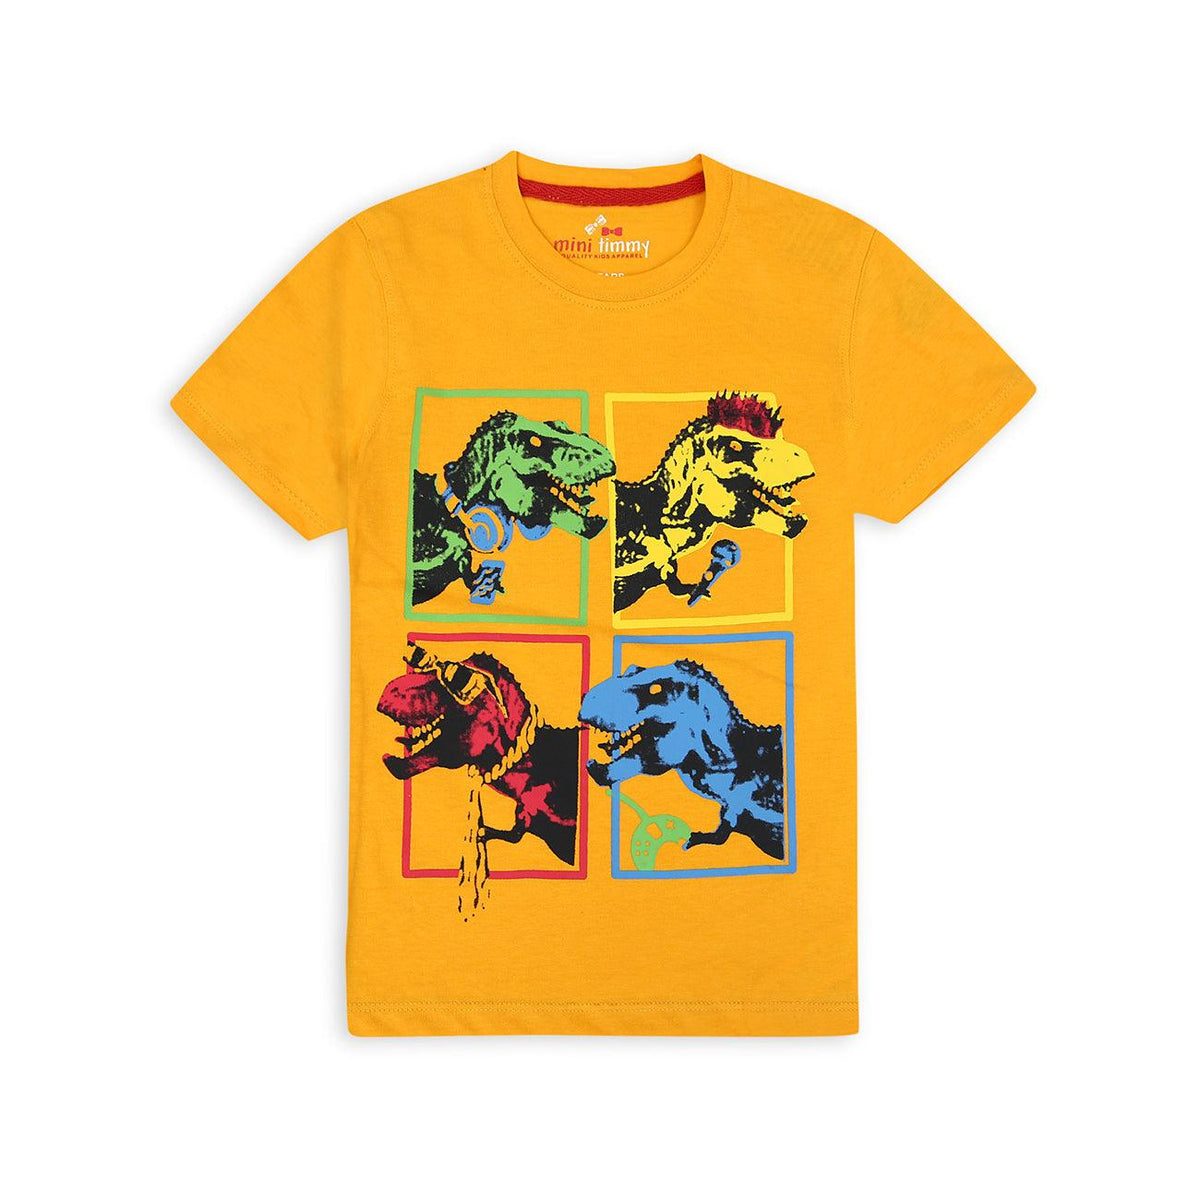 Boys Animated Printed Soft Cotton Yellow T-Shirt 9 MONTH - 10 YRS (MI-11537) - Brands River